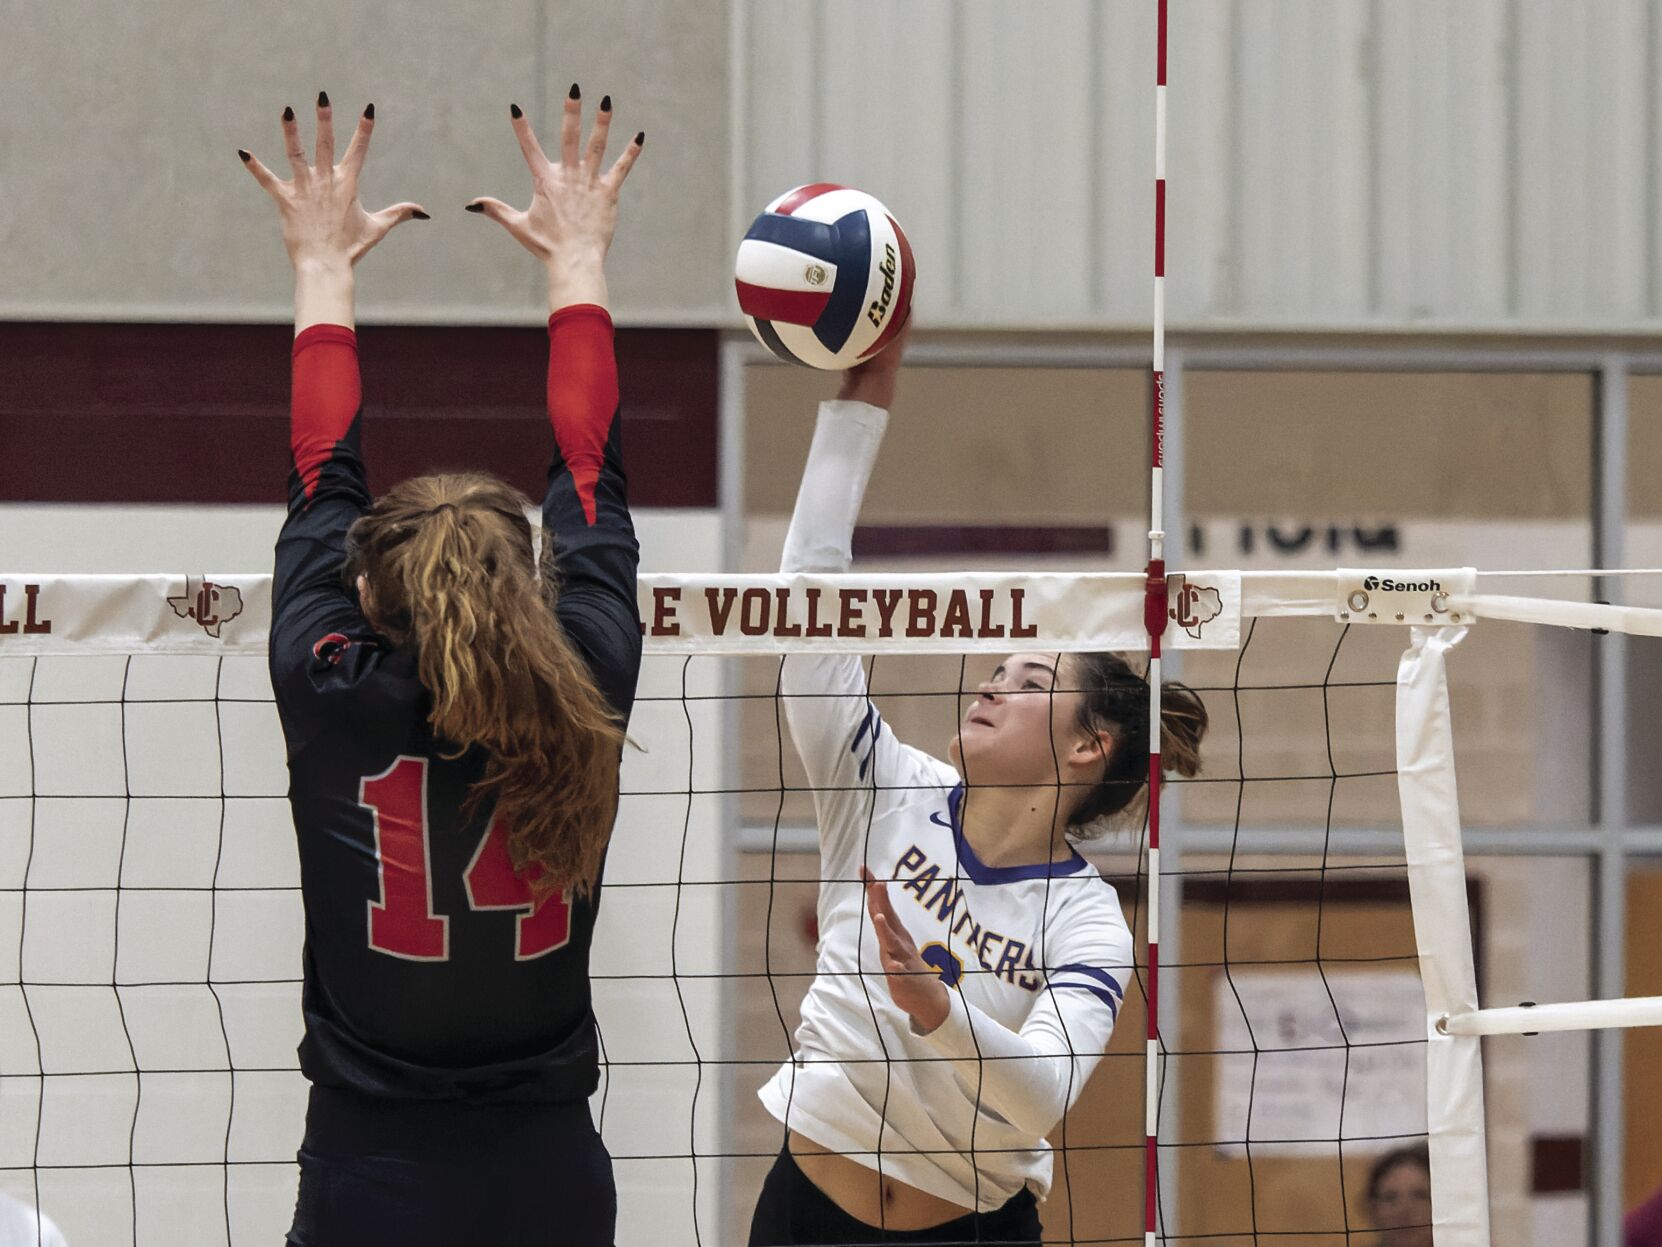 Meet Kealy Dirner: The Versatile Volleyball Player Dominating the Season